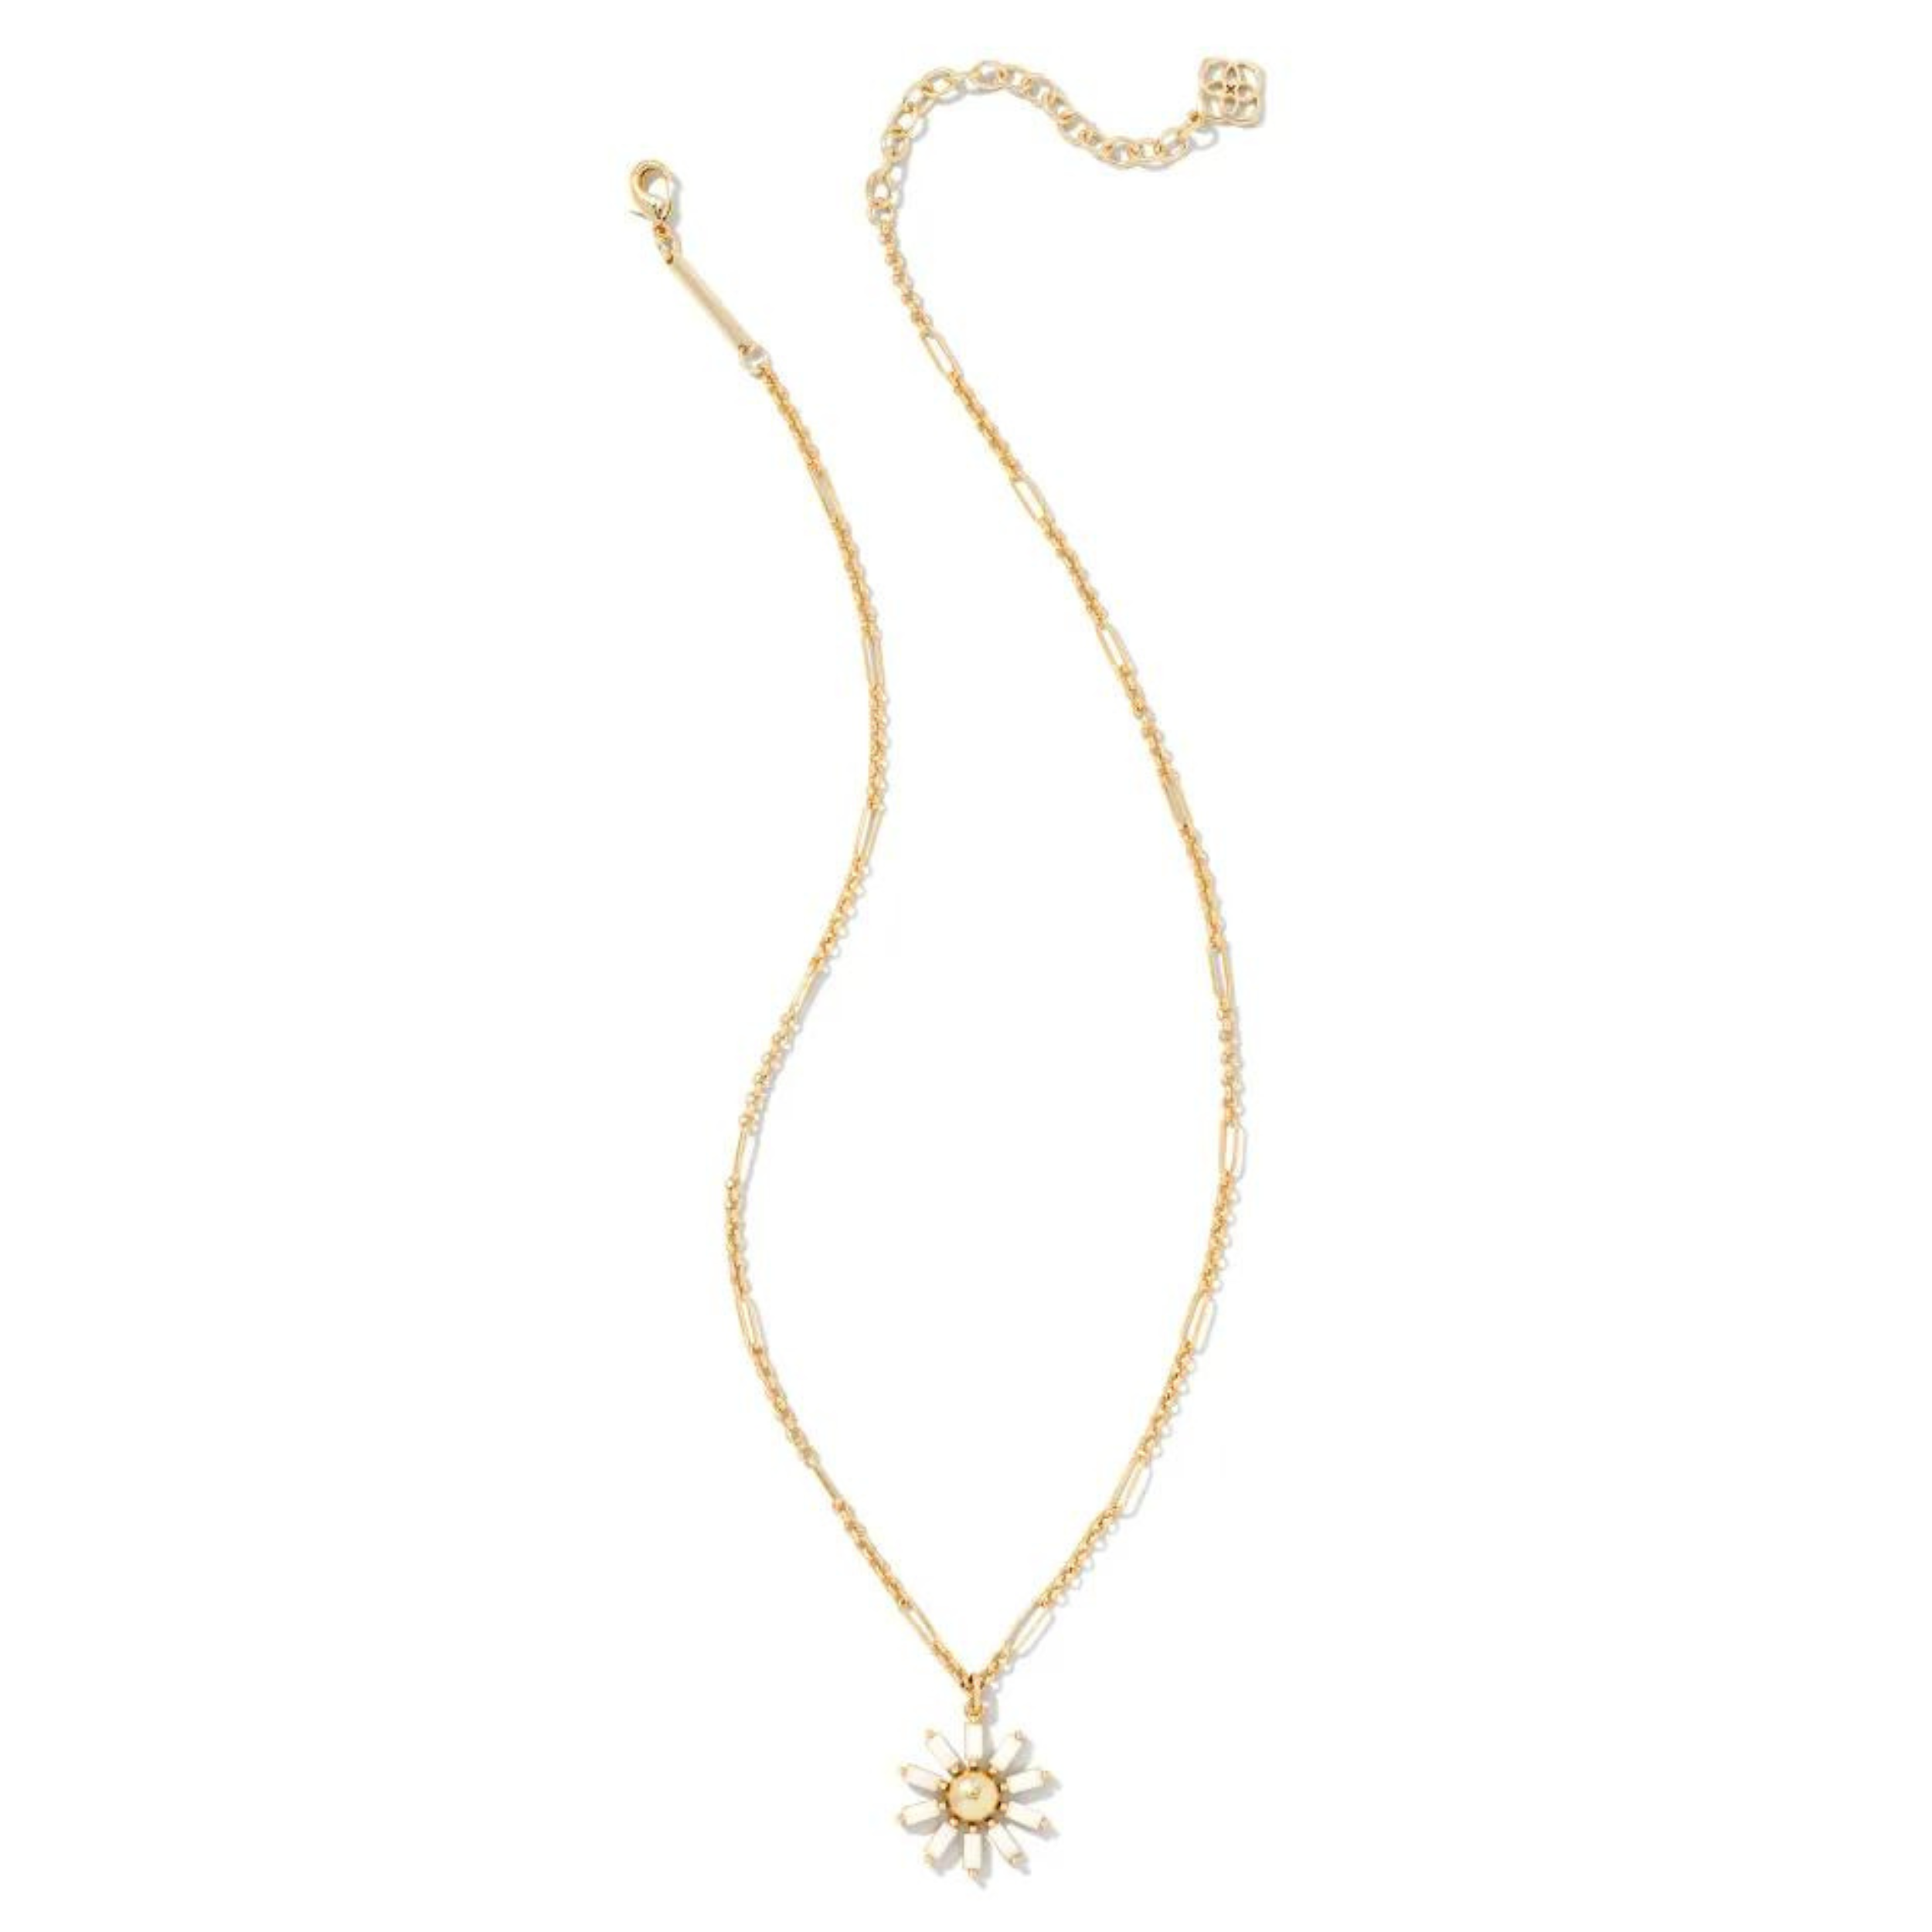 Kendra Scott | Madison Daisy Gold Short Pendant Necklace in White - Giddy Up Glamour Boutique